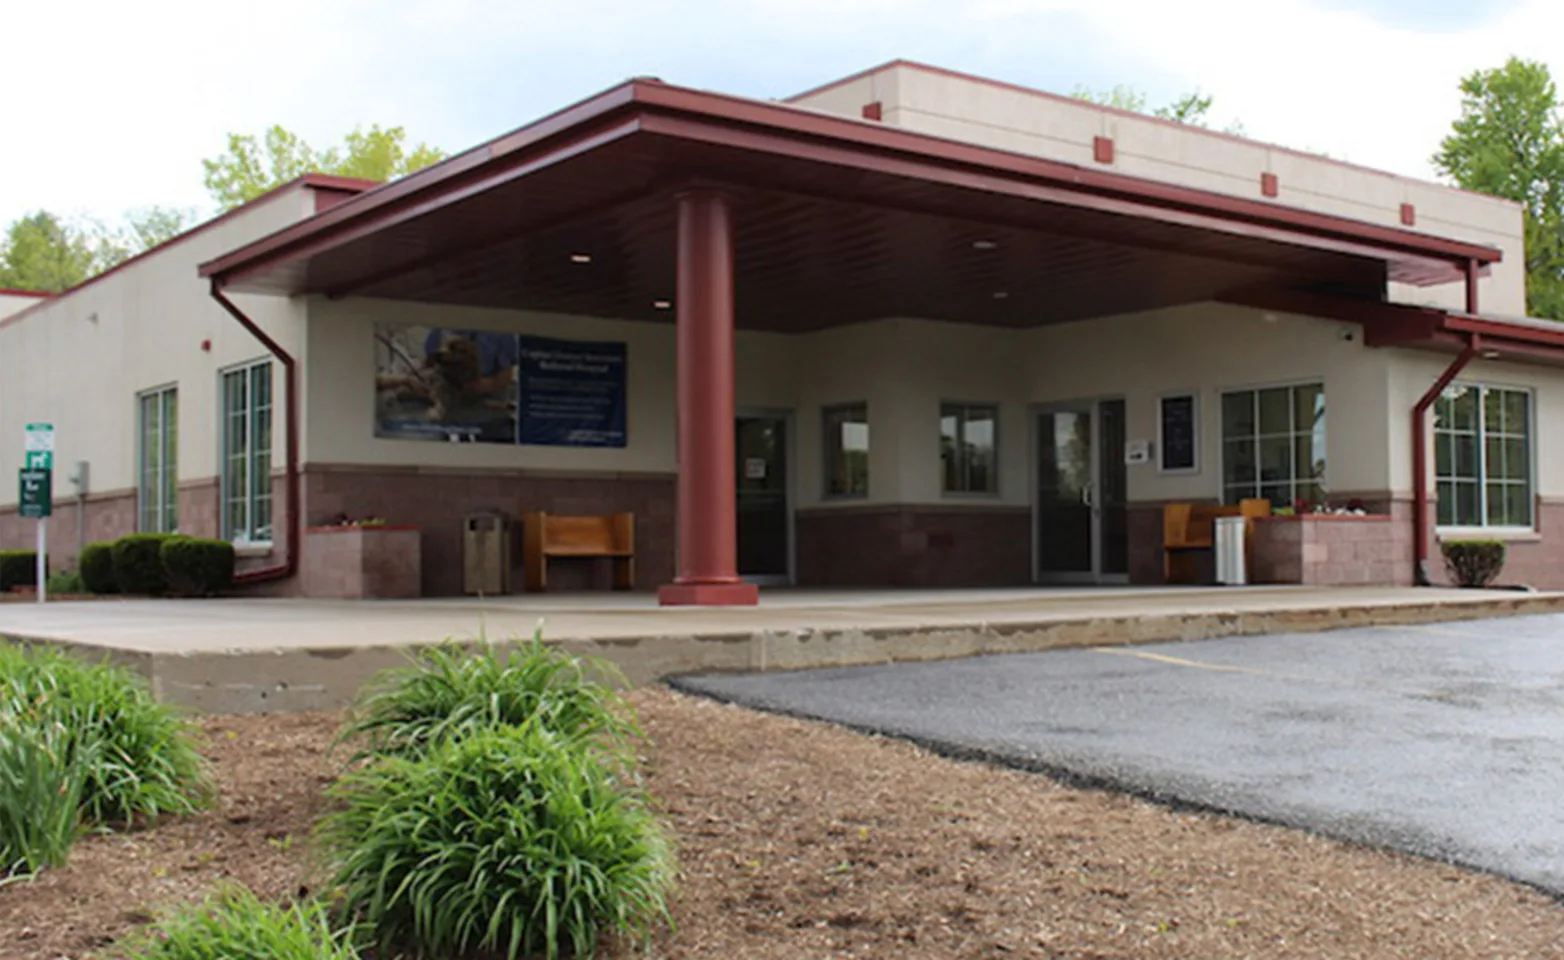 Capital District Veterinary Referral Hospital building